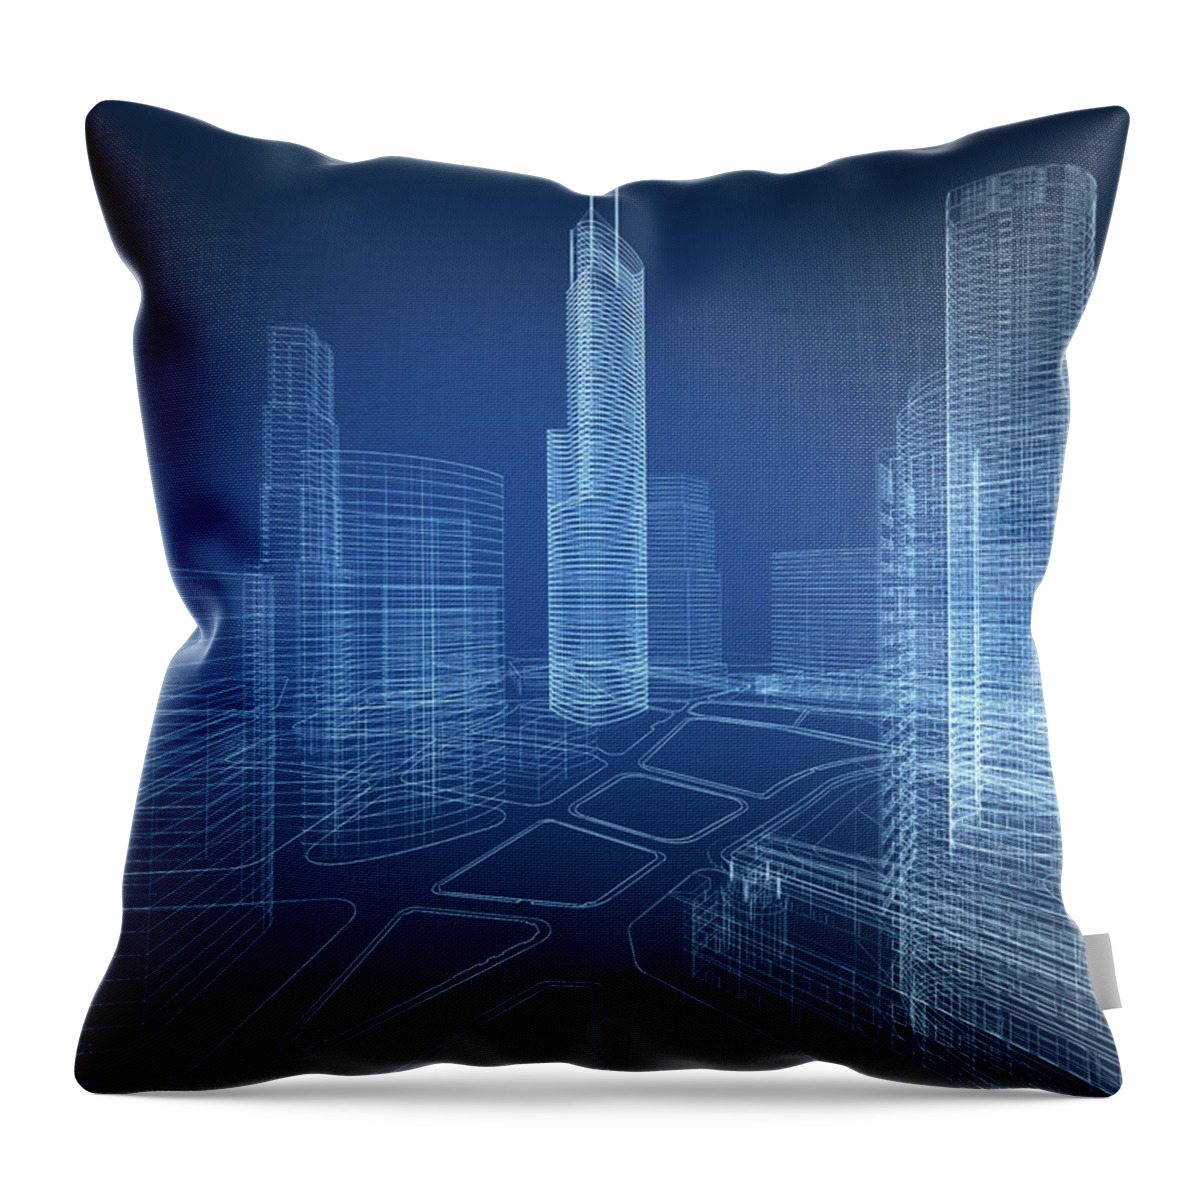 Plan Throw Pillow featuring the photograph 3d Architecture Abstract by Nadla